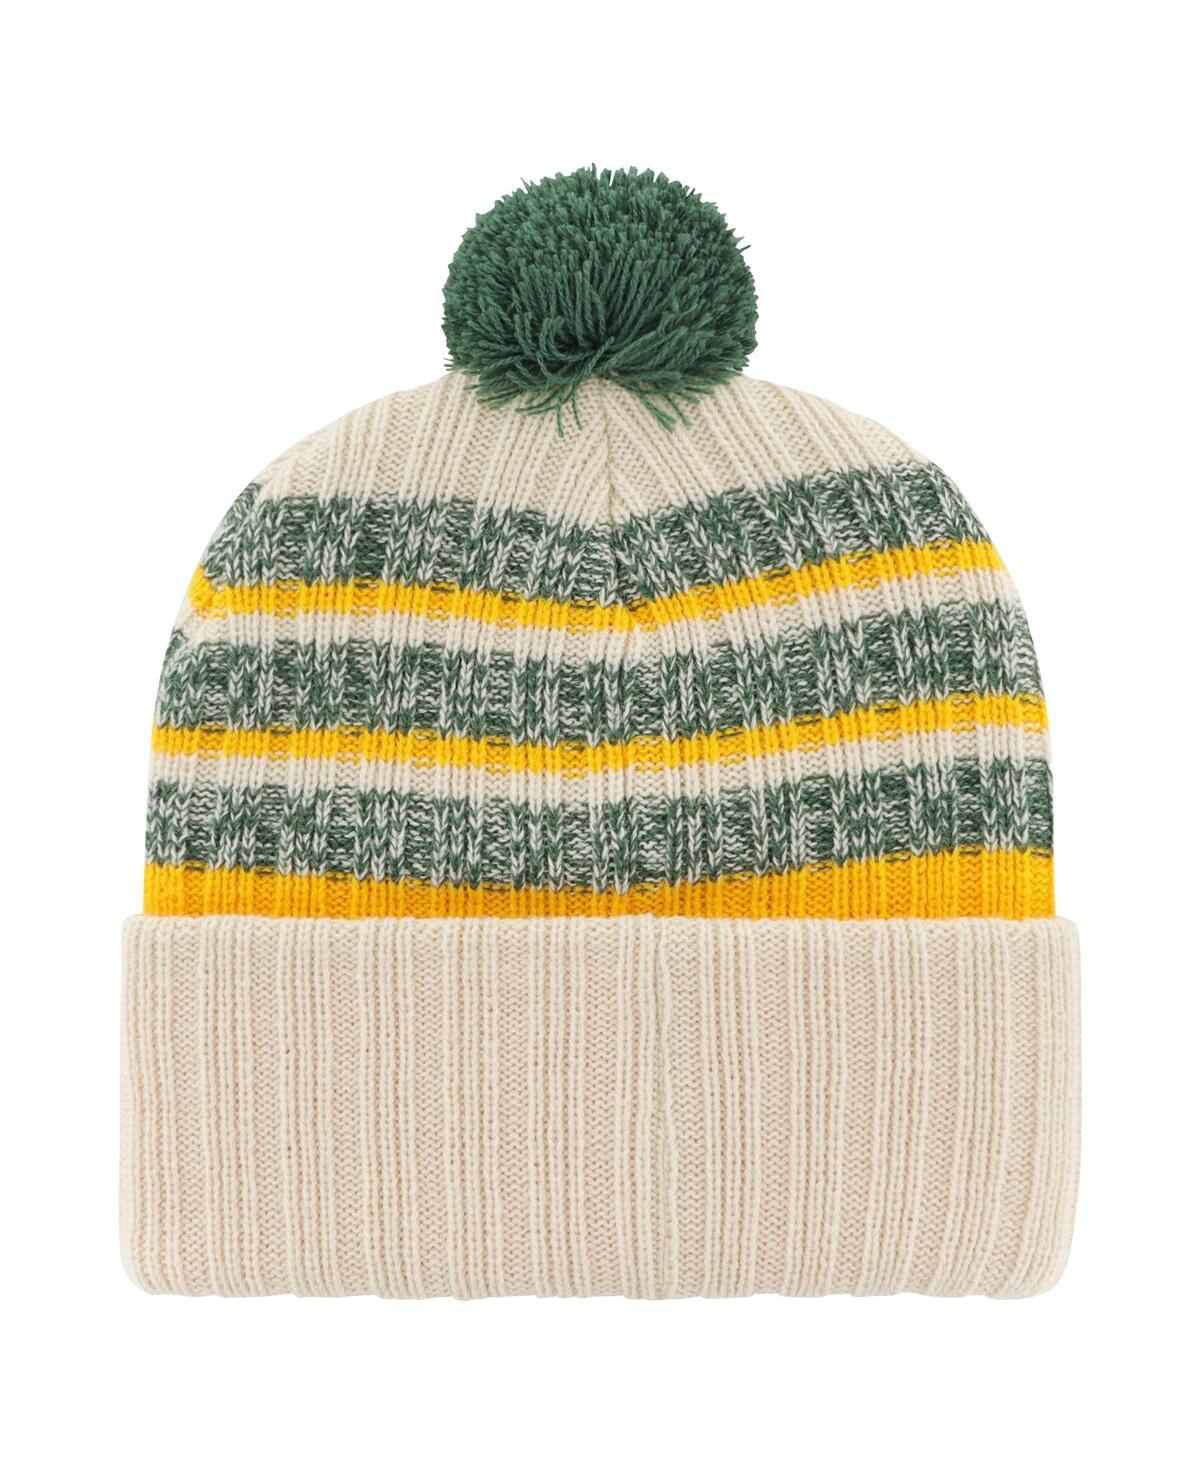 Shop 47 Brand Men's ' Cream Green Bay Packers Tavern Cuffed Knit Hat With Pom